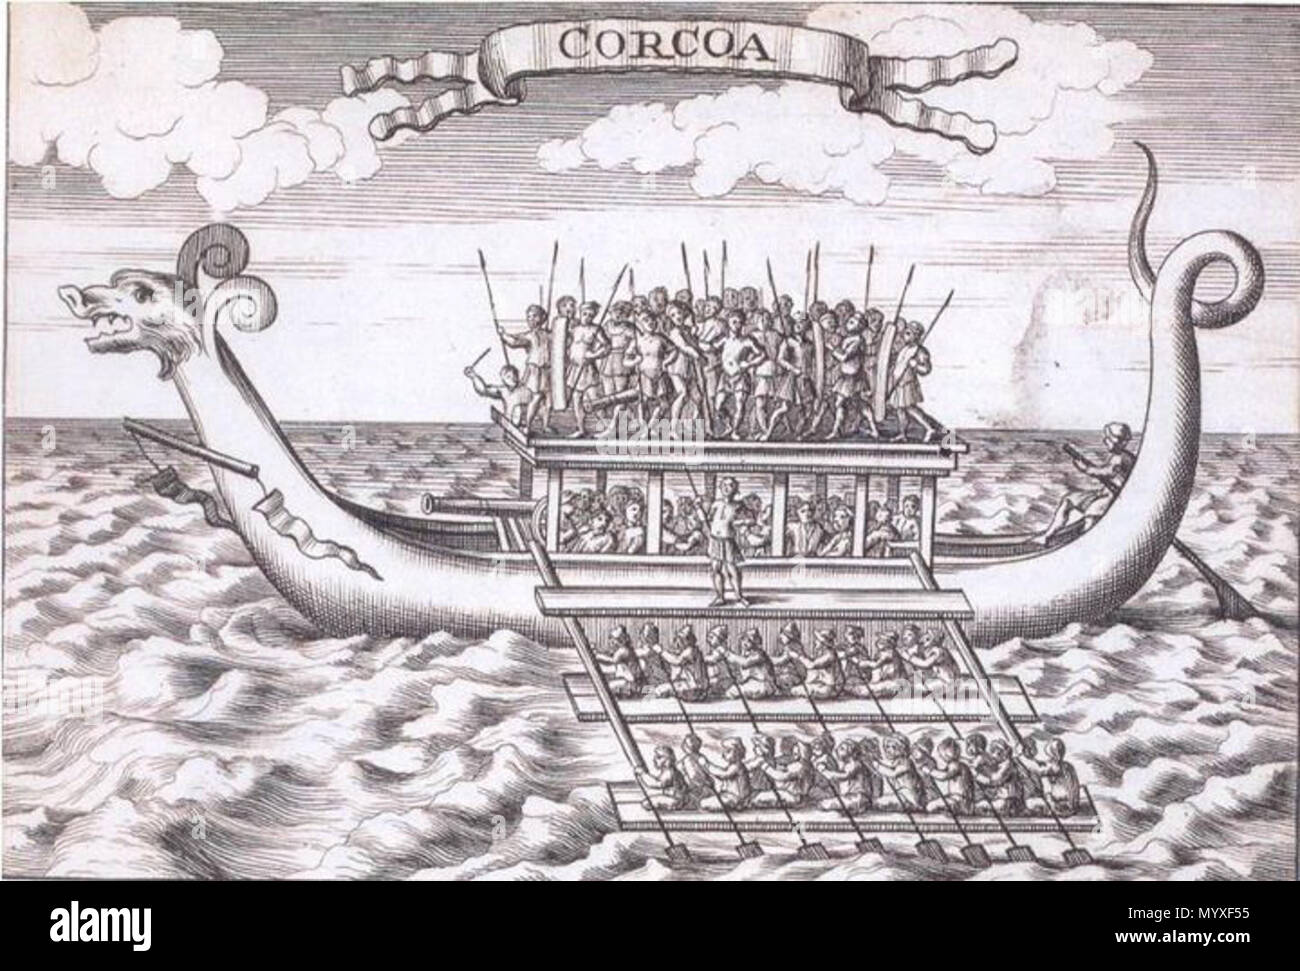 . English: Engraving of a karakoa ('caracoa') from The Discovery and Conquest of the Molucco and Philippine Islands (1711) by Bartolomé Leonardo de Argensola, translated into English by John Stevens  . 1711. Bartolomé Leonardo de Argensola, translated into English by John Stevens 19 Caracoa (Karakoa) Stock Photo